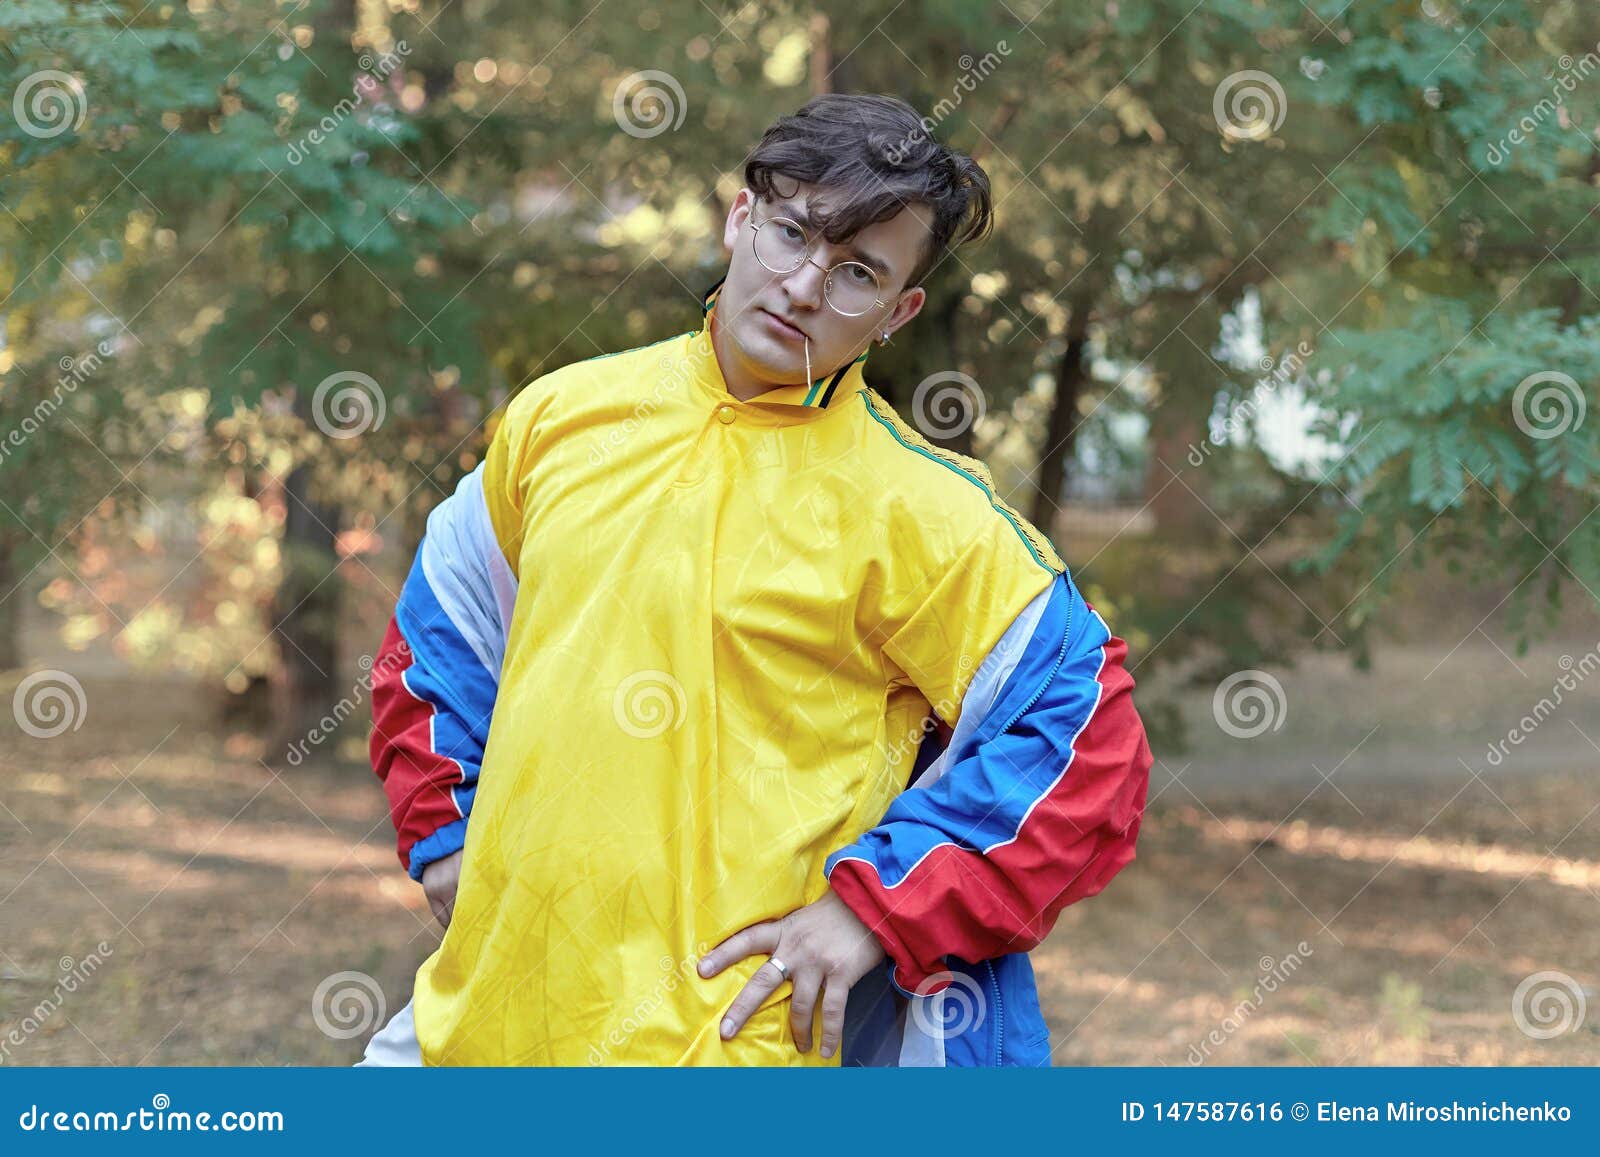 Young Handsome Caucasian Man with Bright Freaky Sportswear 70s Style Stands  at a Morning Park. Stick in the Mouth, Golden Glasses, Stock Photo - Image  of fashion, glasses: 147587616